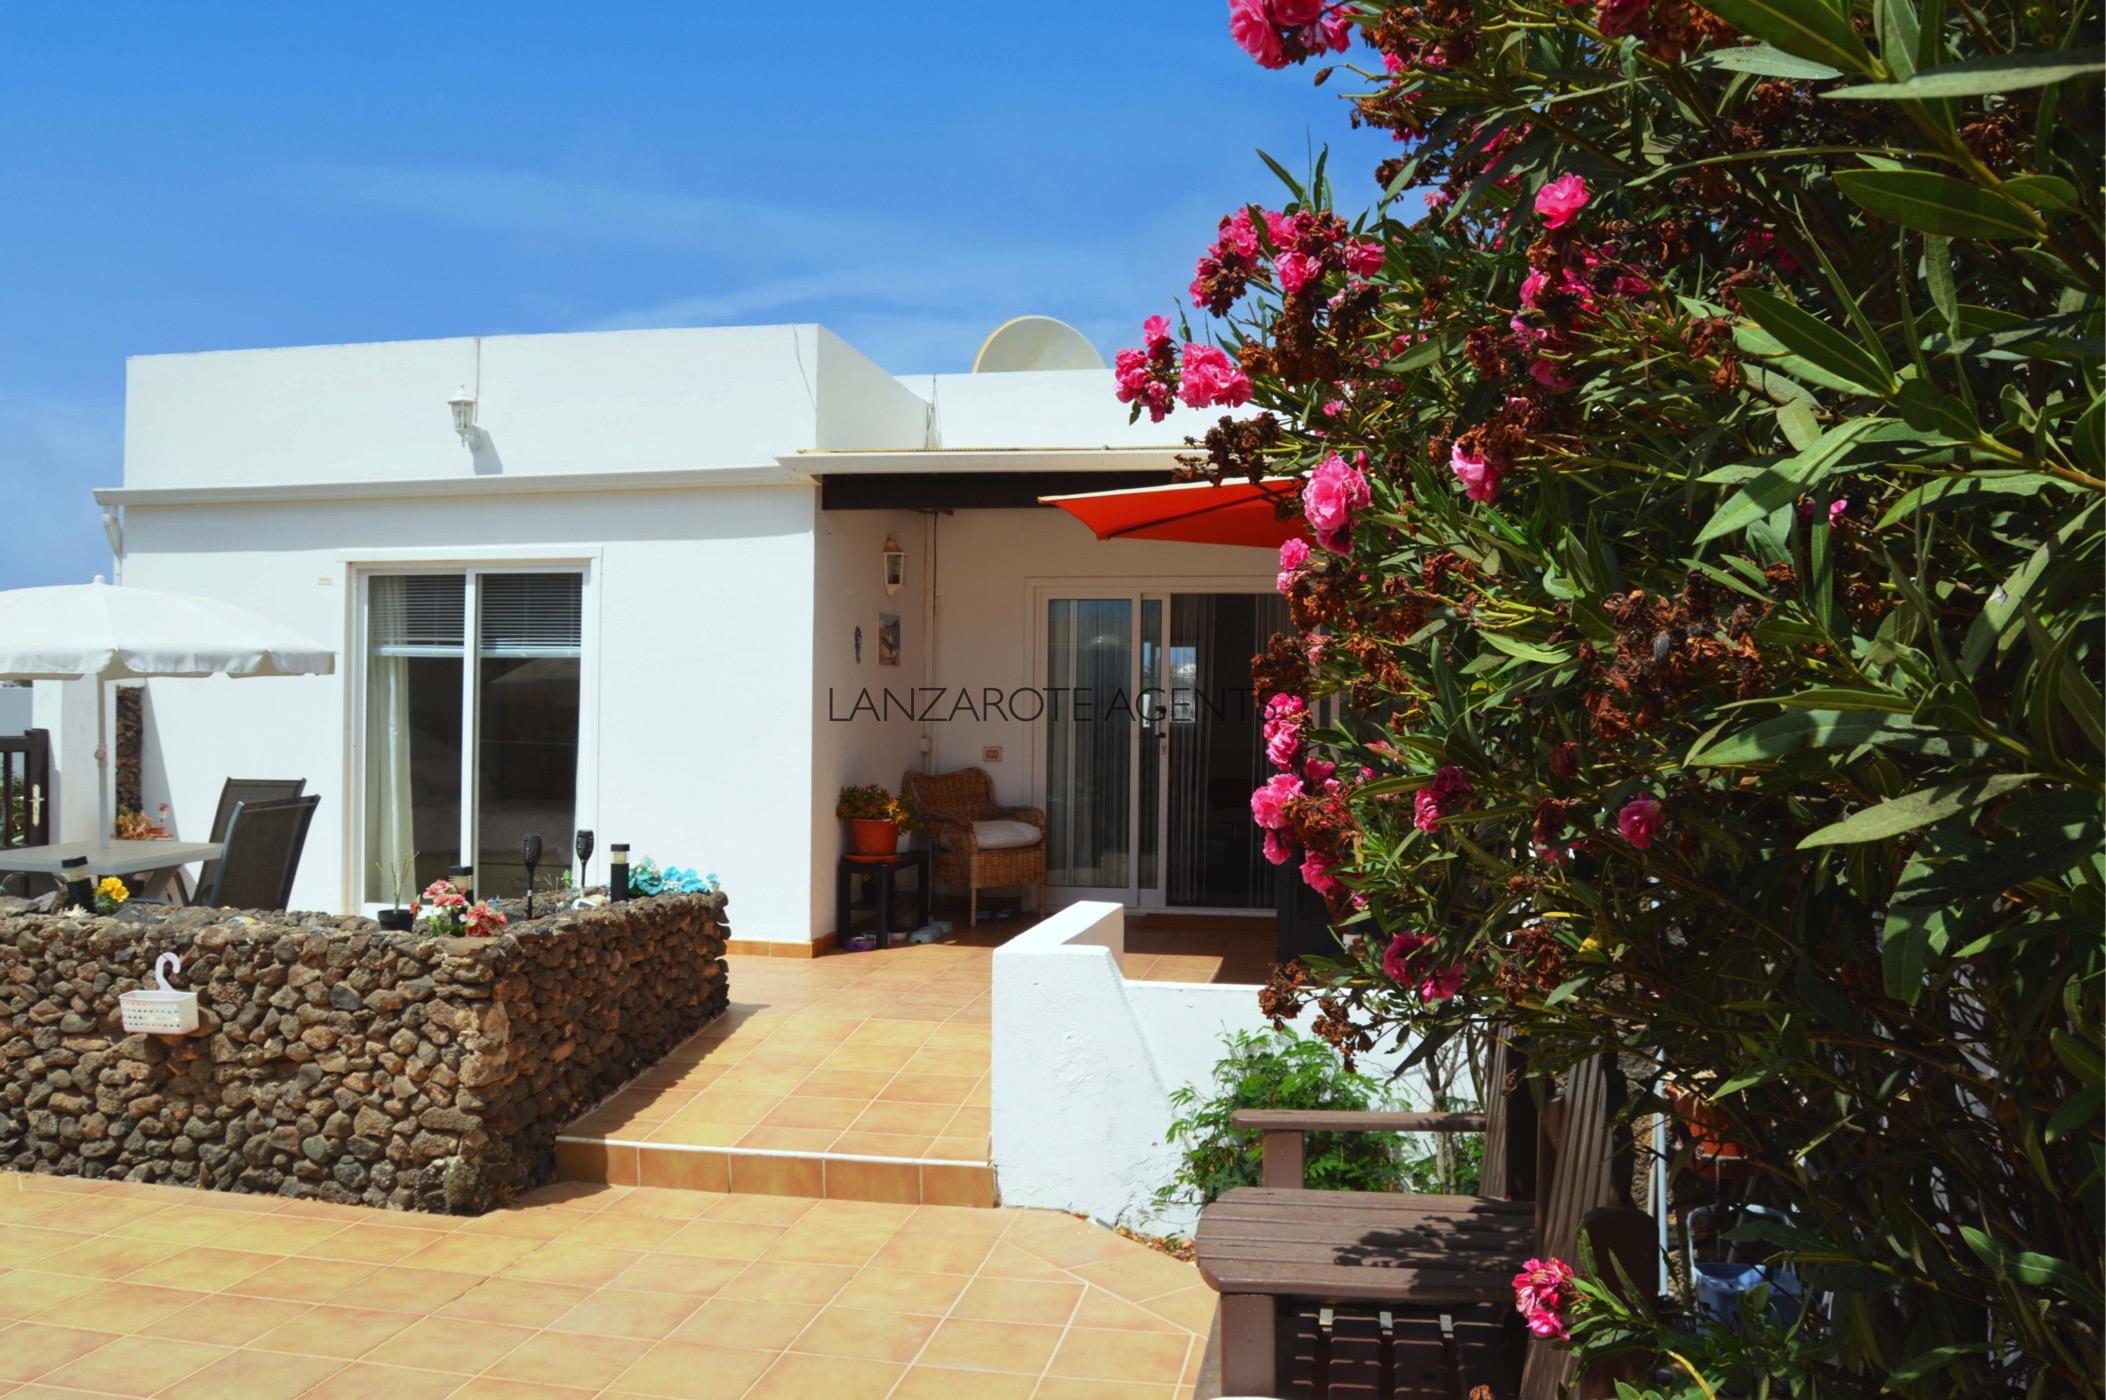 Lovely Semi Detached 2 Bedroom Villa with Massive Potential Near Playa Blanca Town Centre